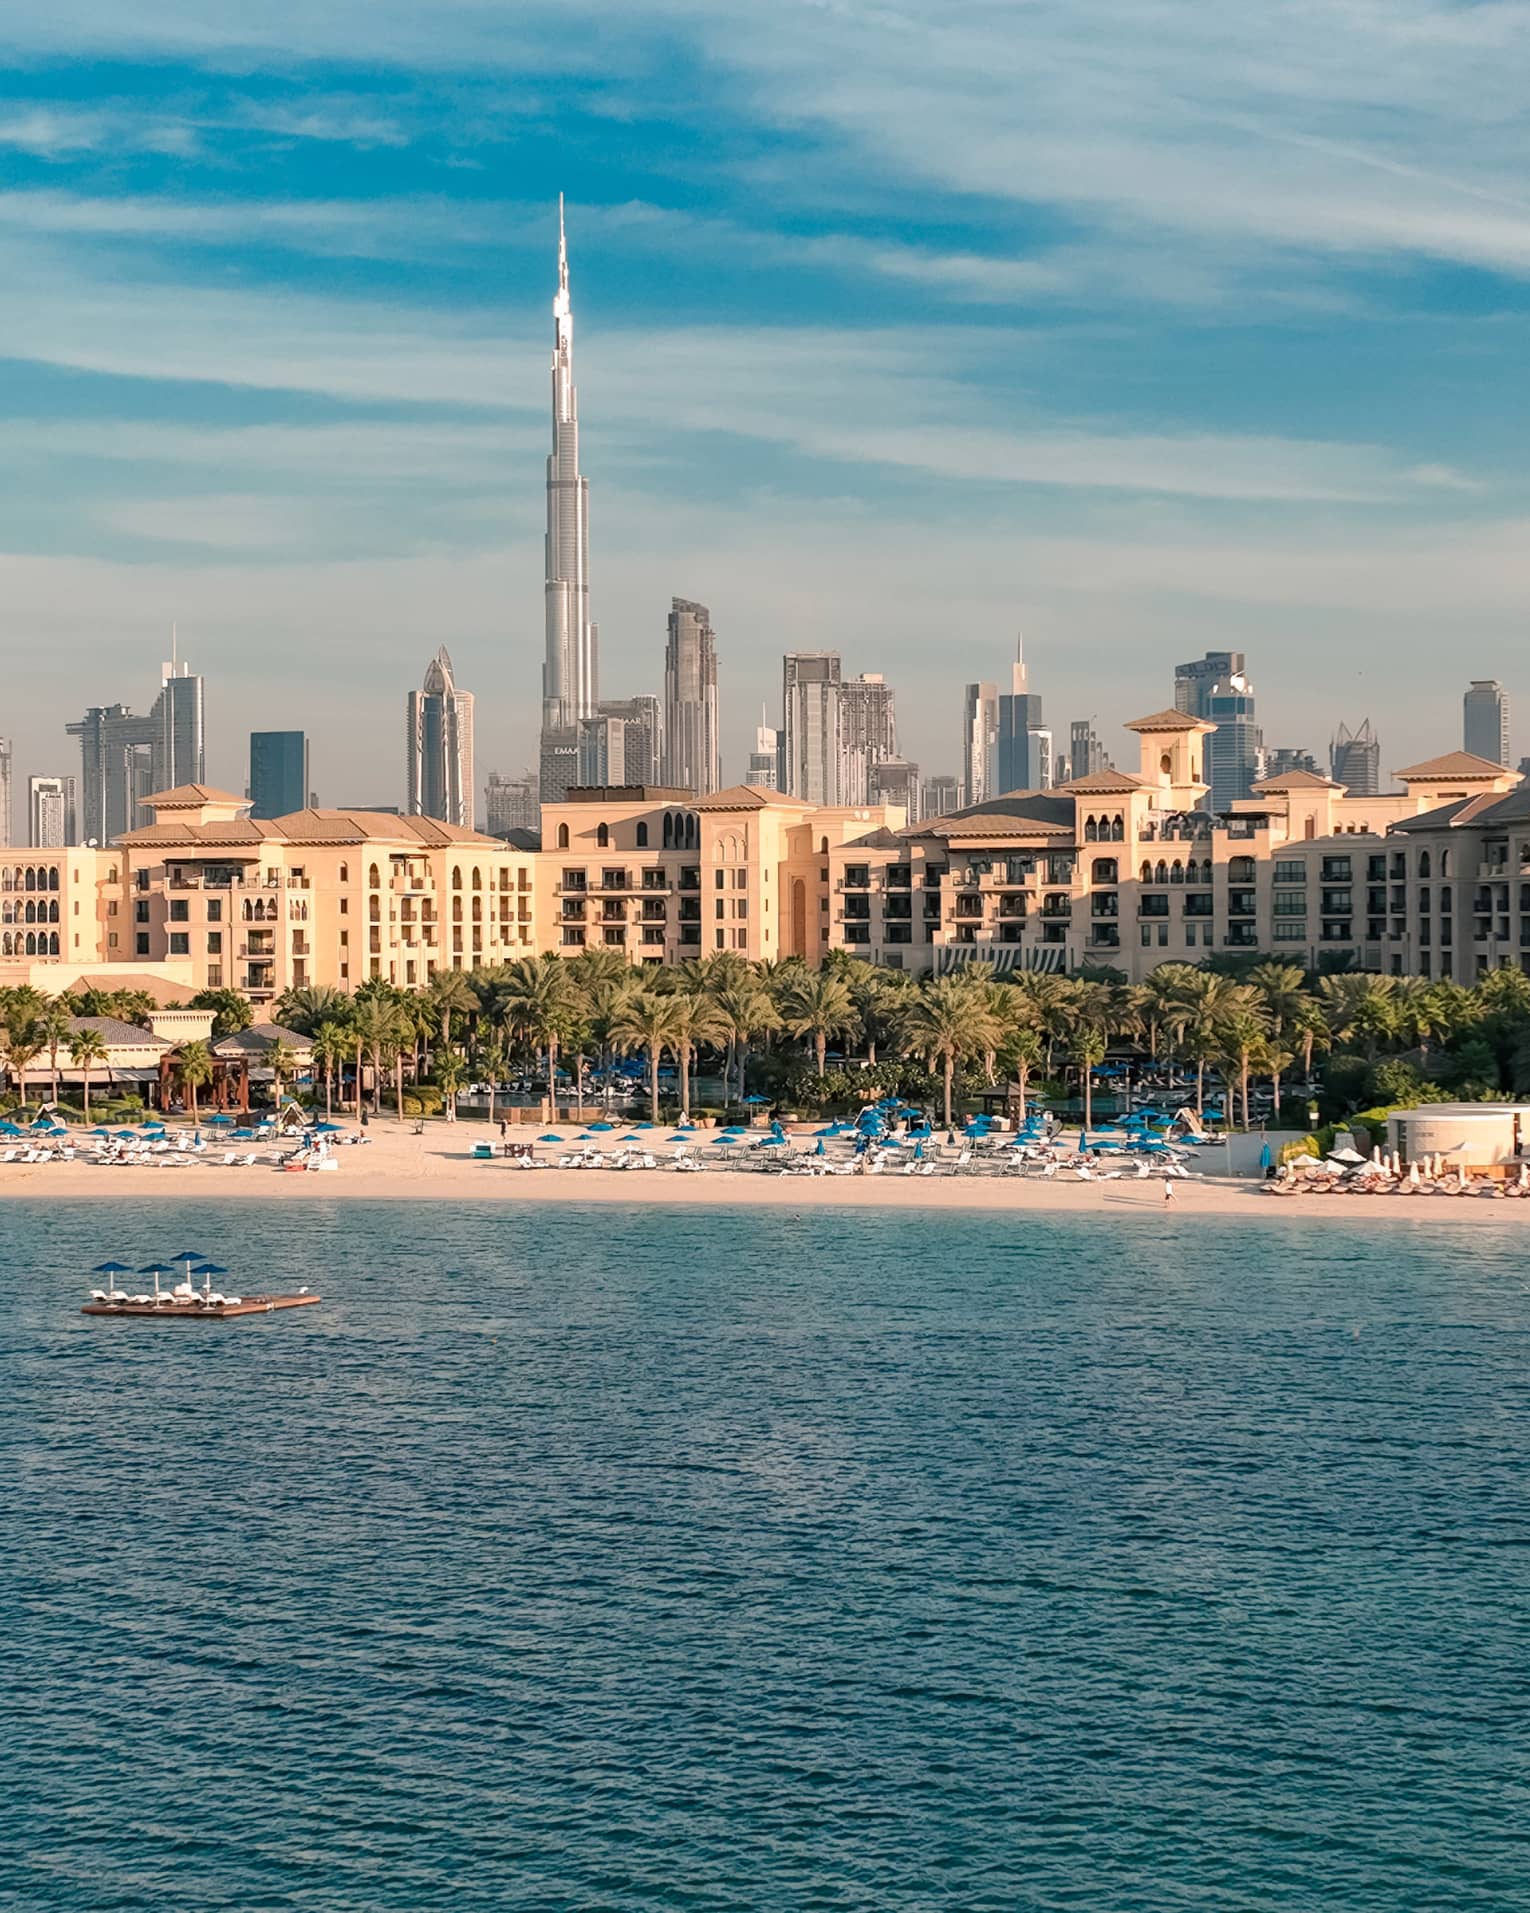 An aerial view of Jumeirah Beach from the sea with a view of downtown in the distance.